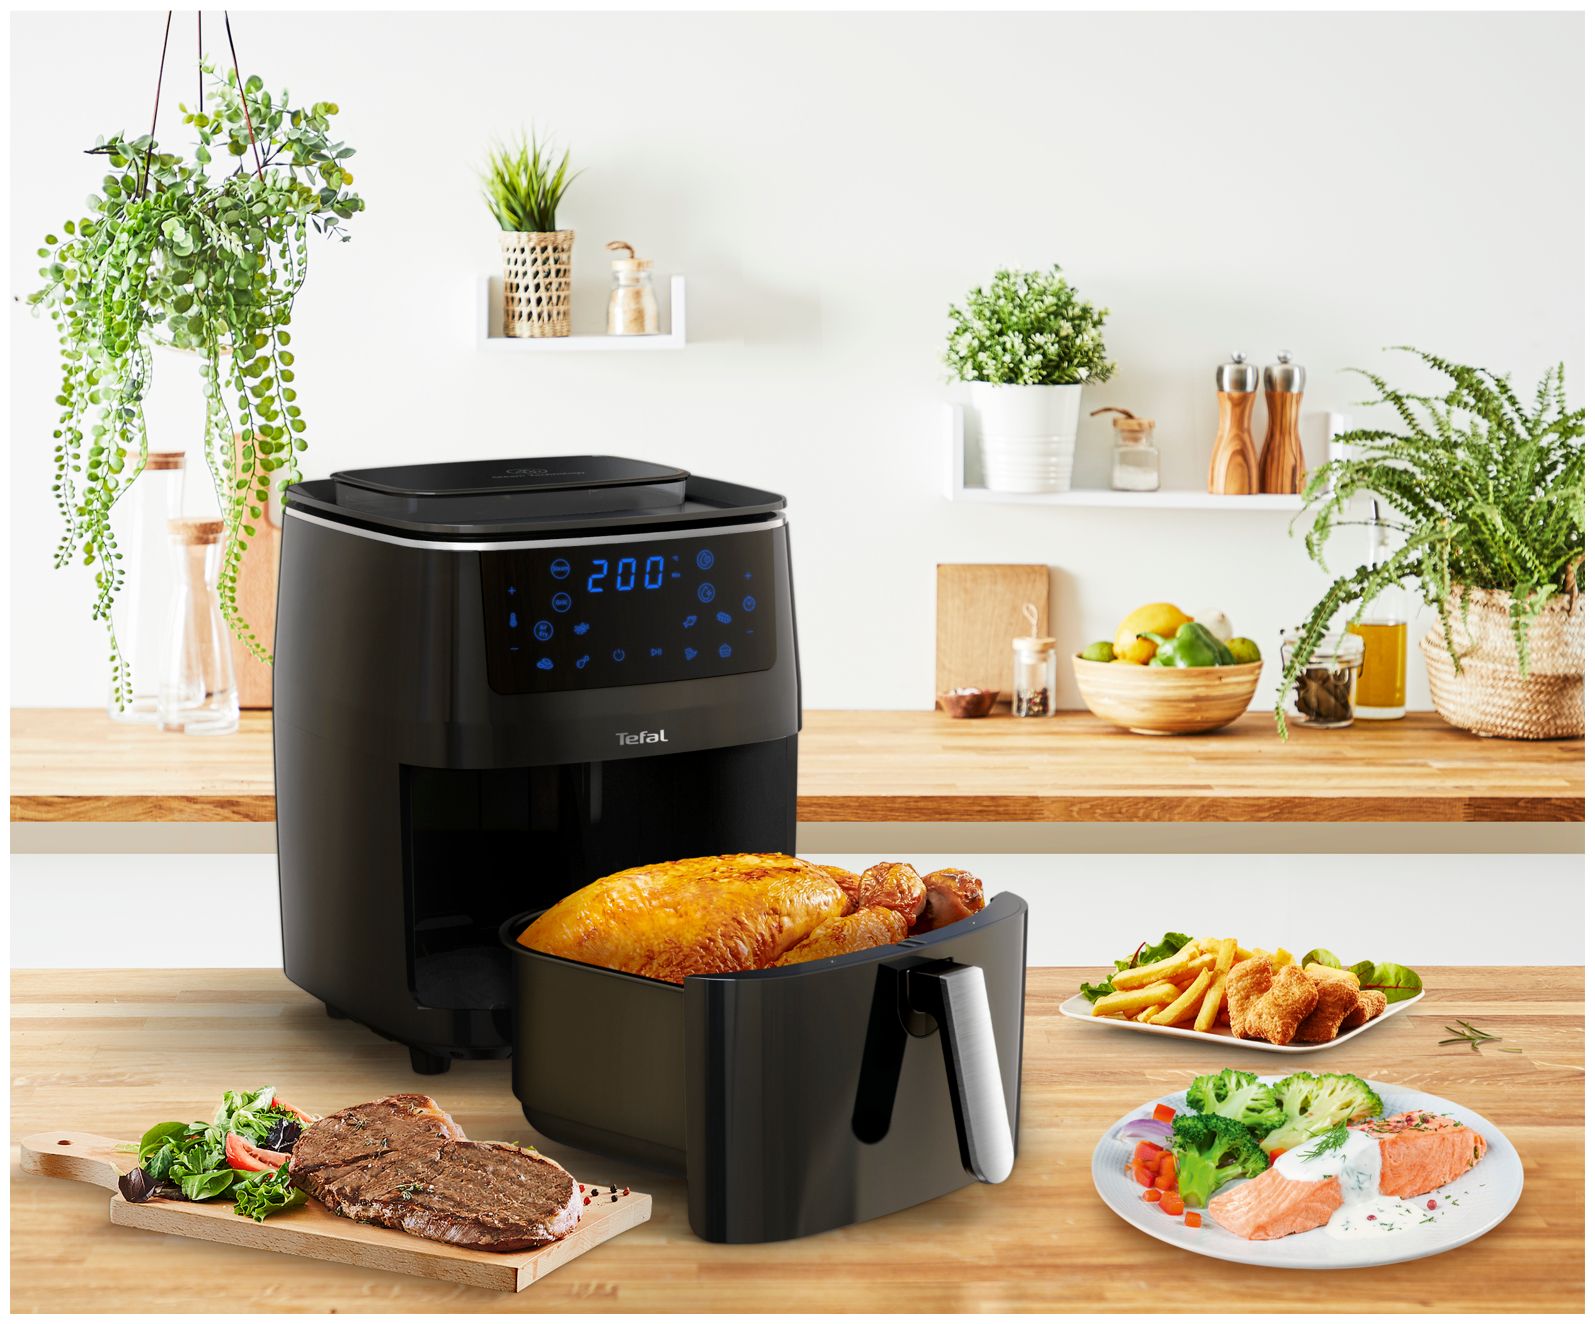 Tefal FW2018 Easy Fry Grill & Steam Heißluftfritteuse 1700 W bei Boomstore